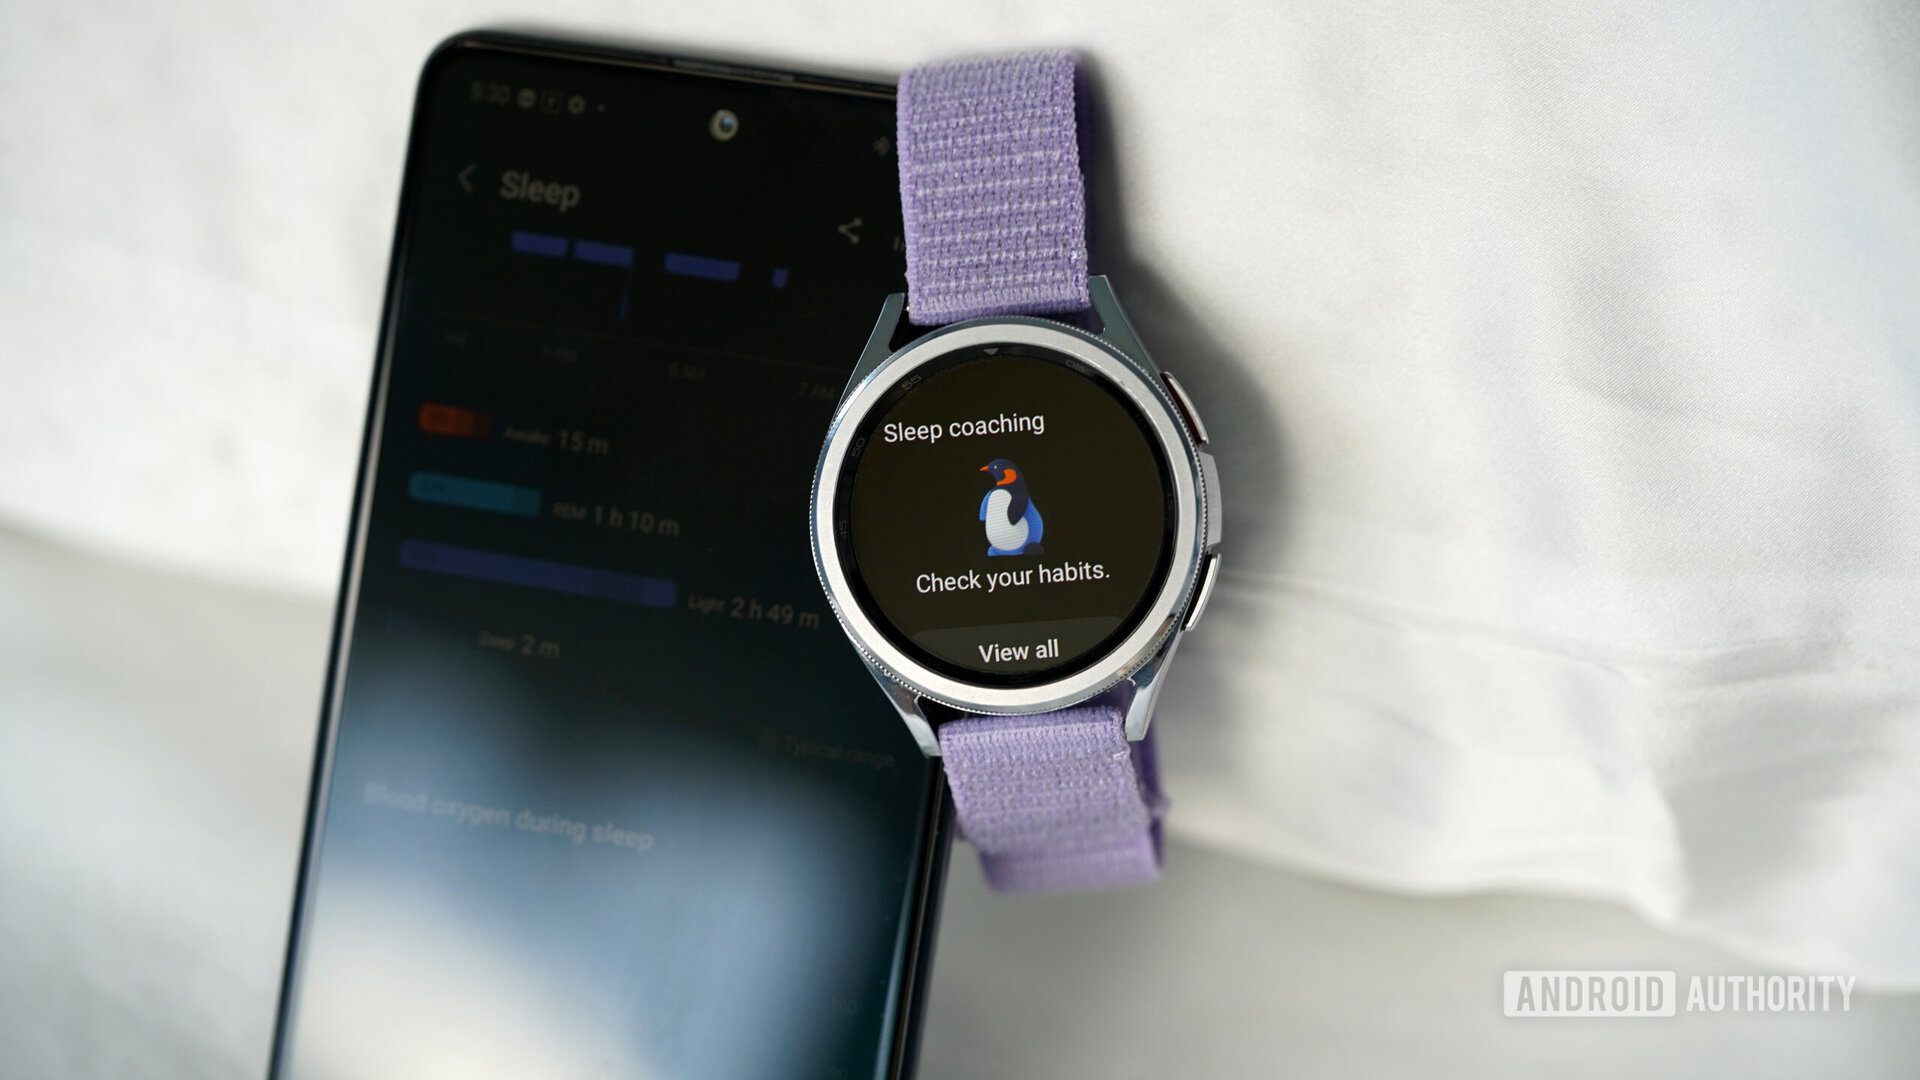 A Galaxy Watch and Galaxy phone each display sleep related features.